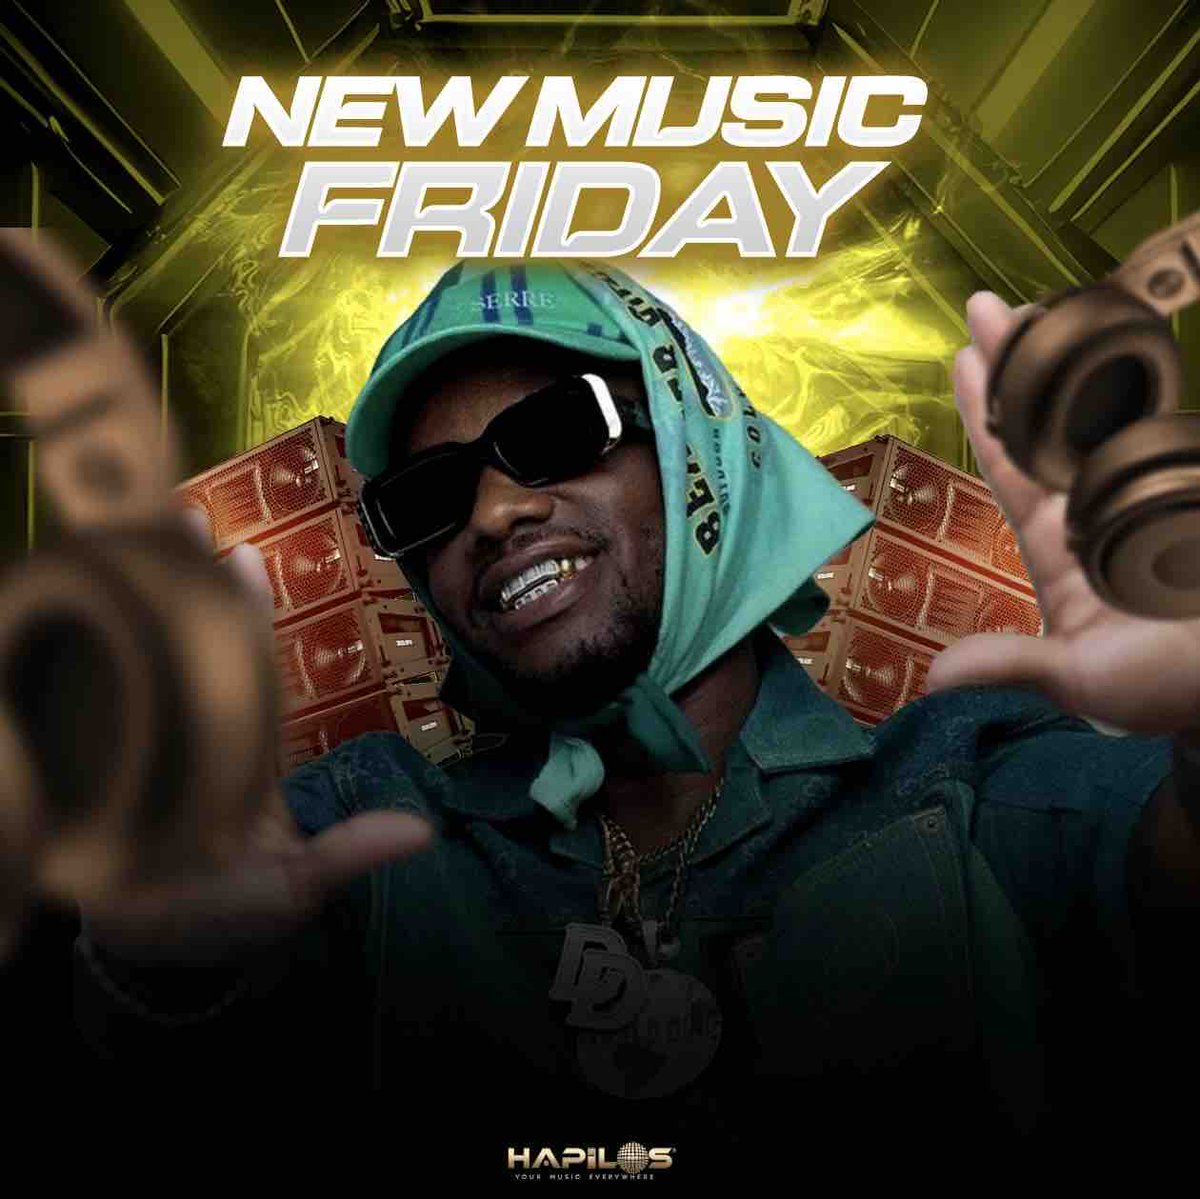 Happy Friday 😁
Time for some new music ‼️

#DancehallMusic #Dancehall #DancehallArtist #DancehallDaily #DancehallReggae #ReggaeDancehall #NewMusicFriday #NewMusicFridays #NewMusicRelease